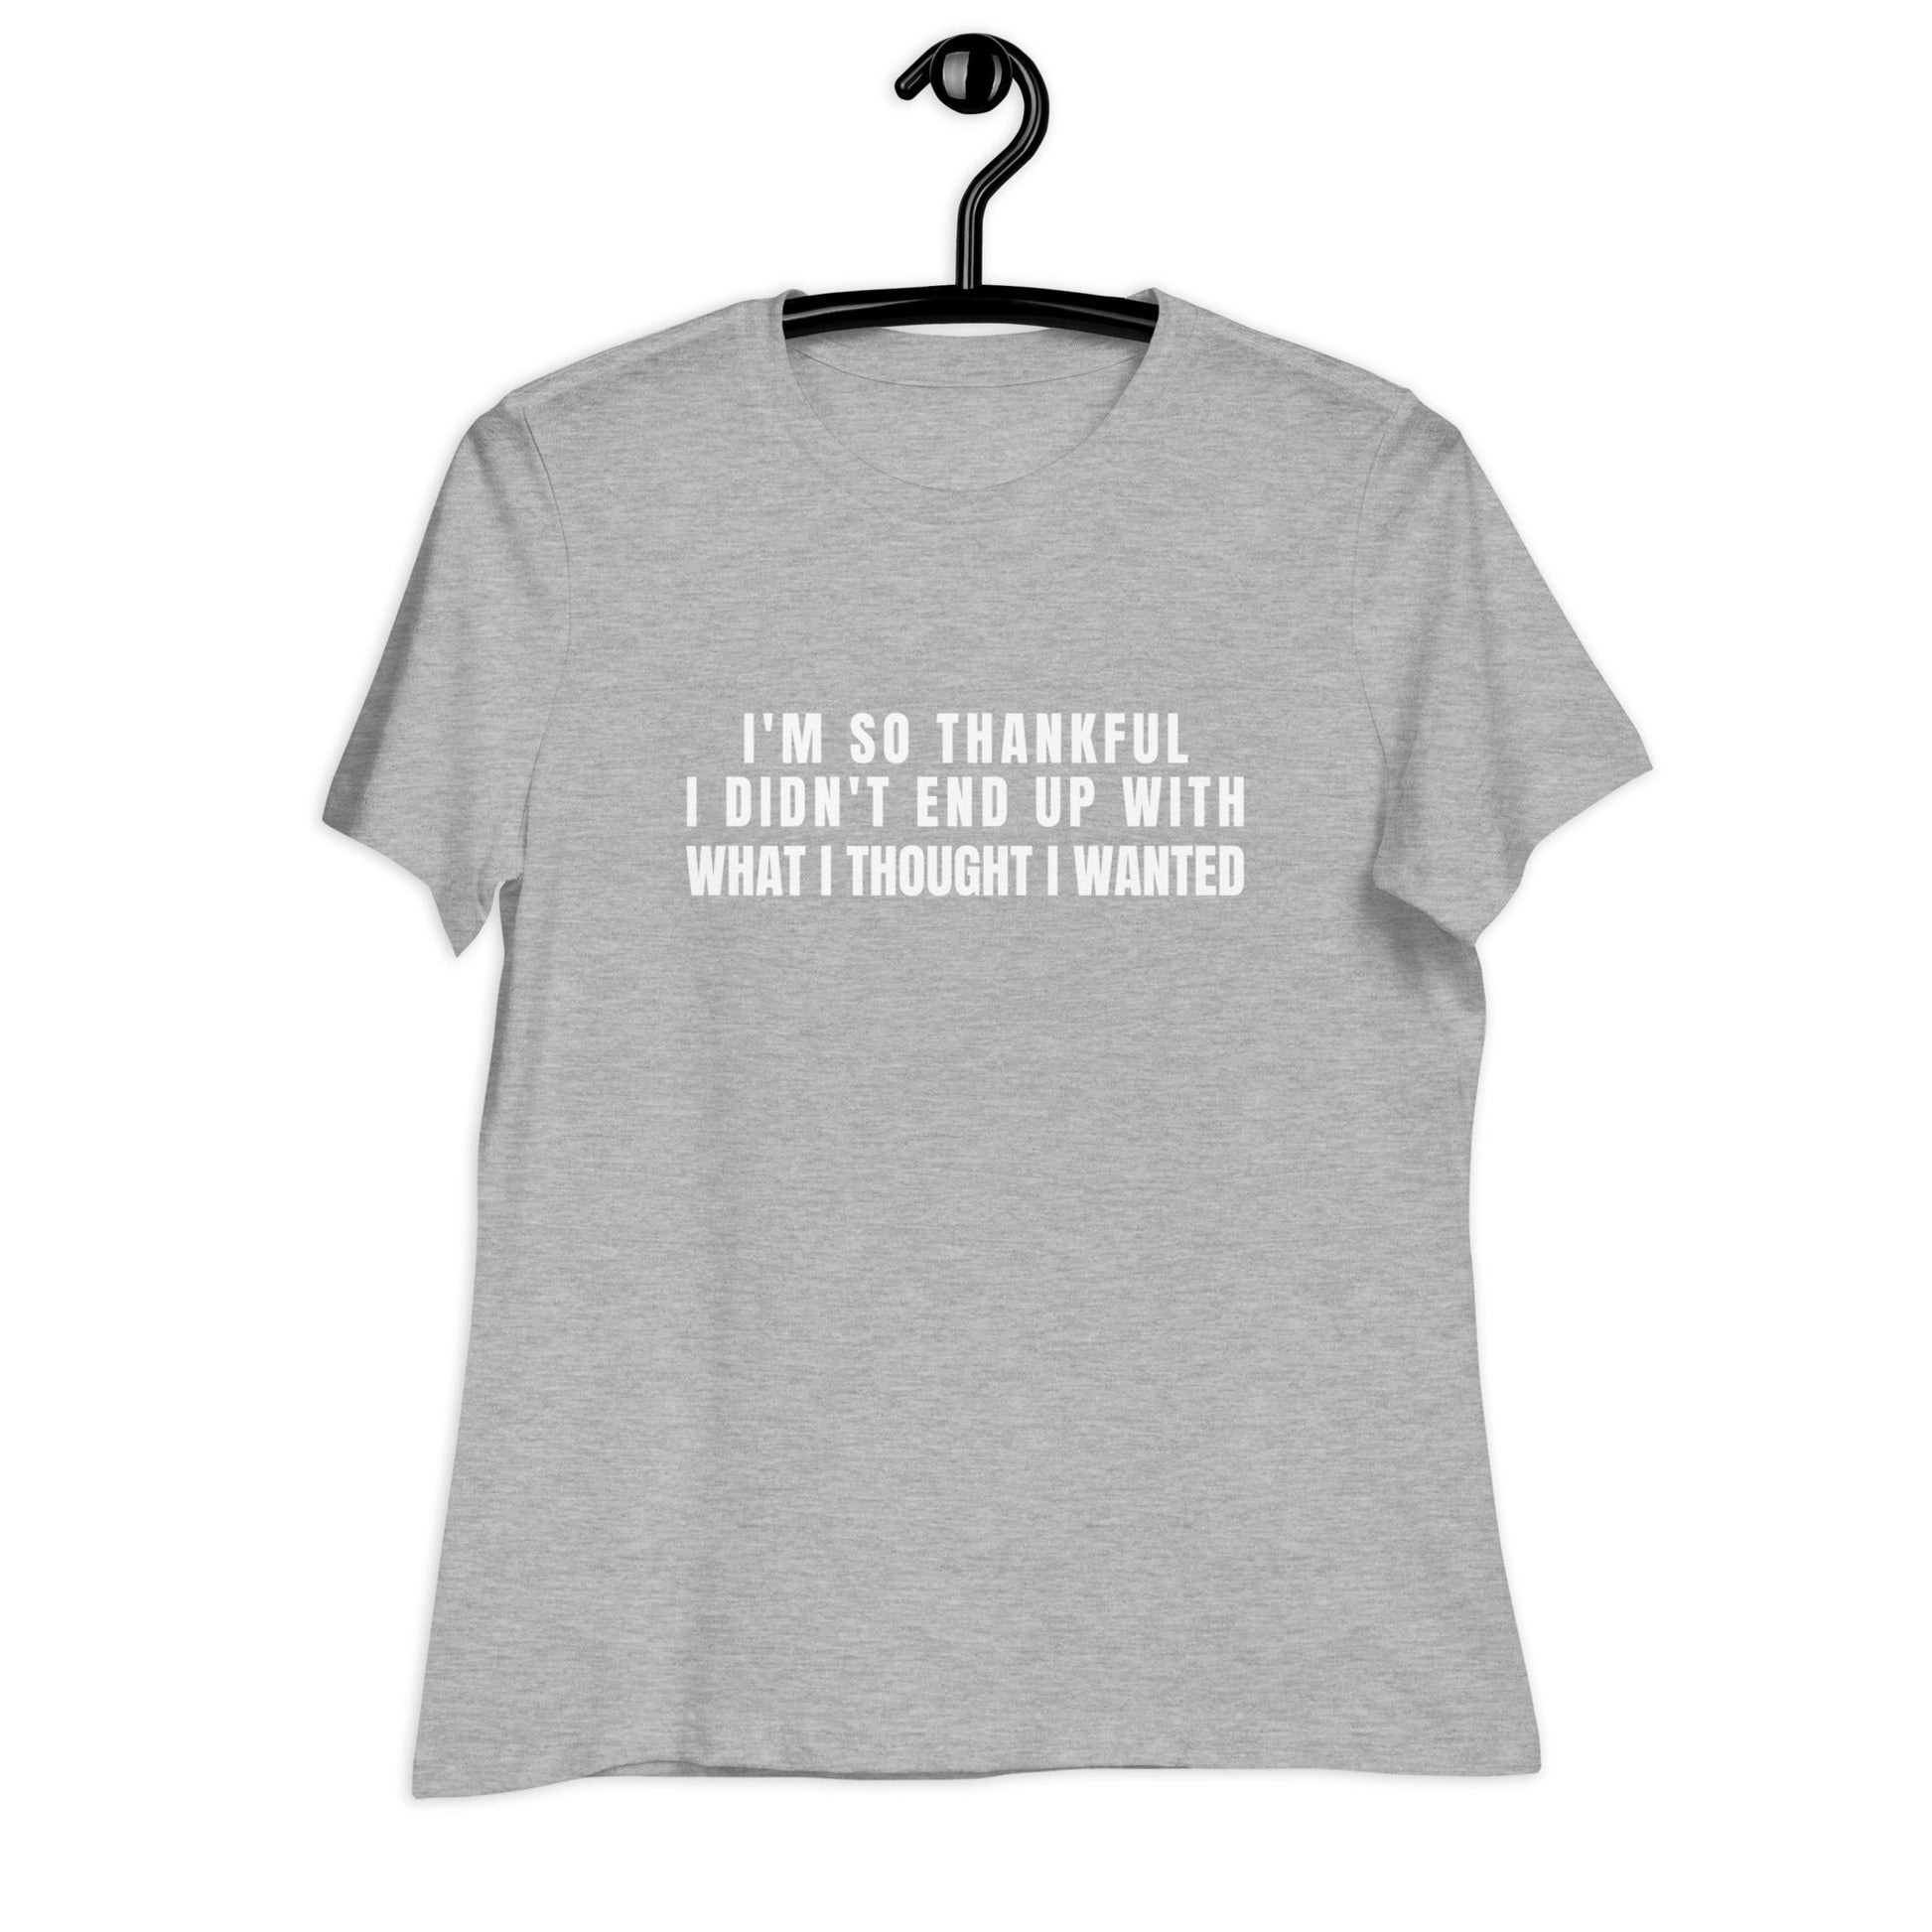 I'm So Thankful I Didn't End Up With What I Thought I Wanted Women's Relaxed T-Shirt - Catch This Tea Shirts